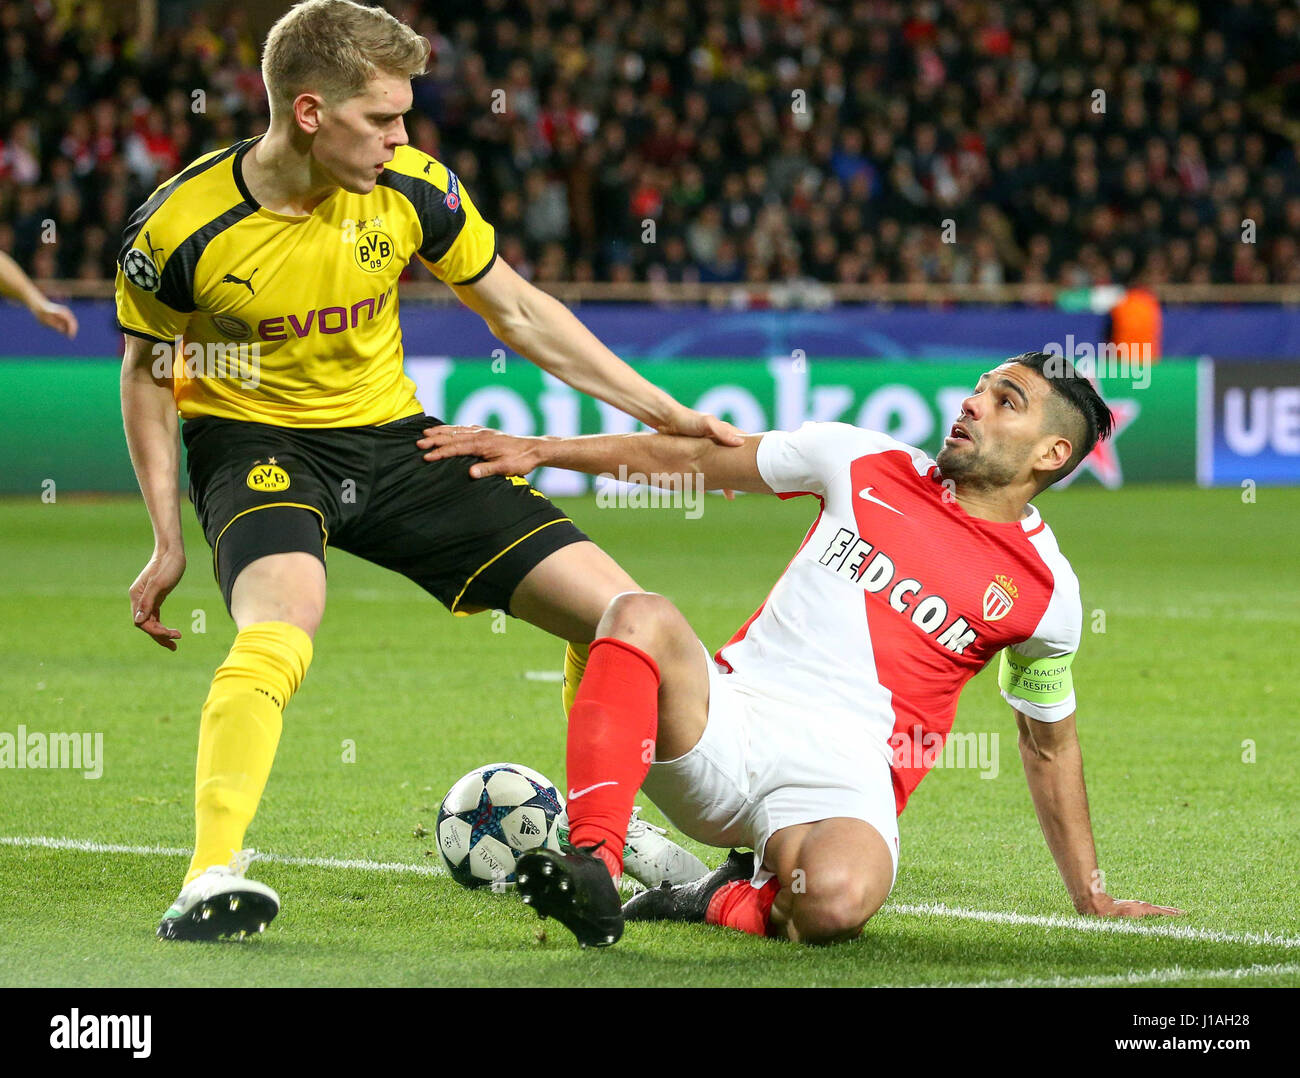 Fontvieille. 19th Apr, 2017. Radamel Falcao(R) of AS Monaco vies with Lukasz Piszczek of Borussia Dortmund during their quaterfinal second leg match of UEFA Champions League in Fontvieille, Monaco on April 19, 2017. Monaco won 3-1 and advanced to the semifinal with 6-3 on aggregate. Credit: Serge Haouzi/Xinhua/Alamy Live News Stock Photo